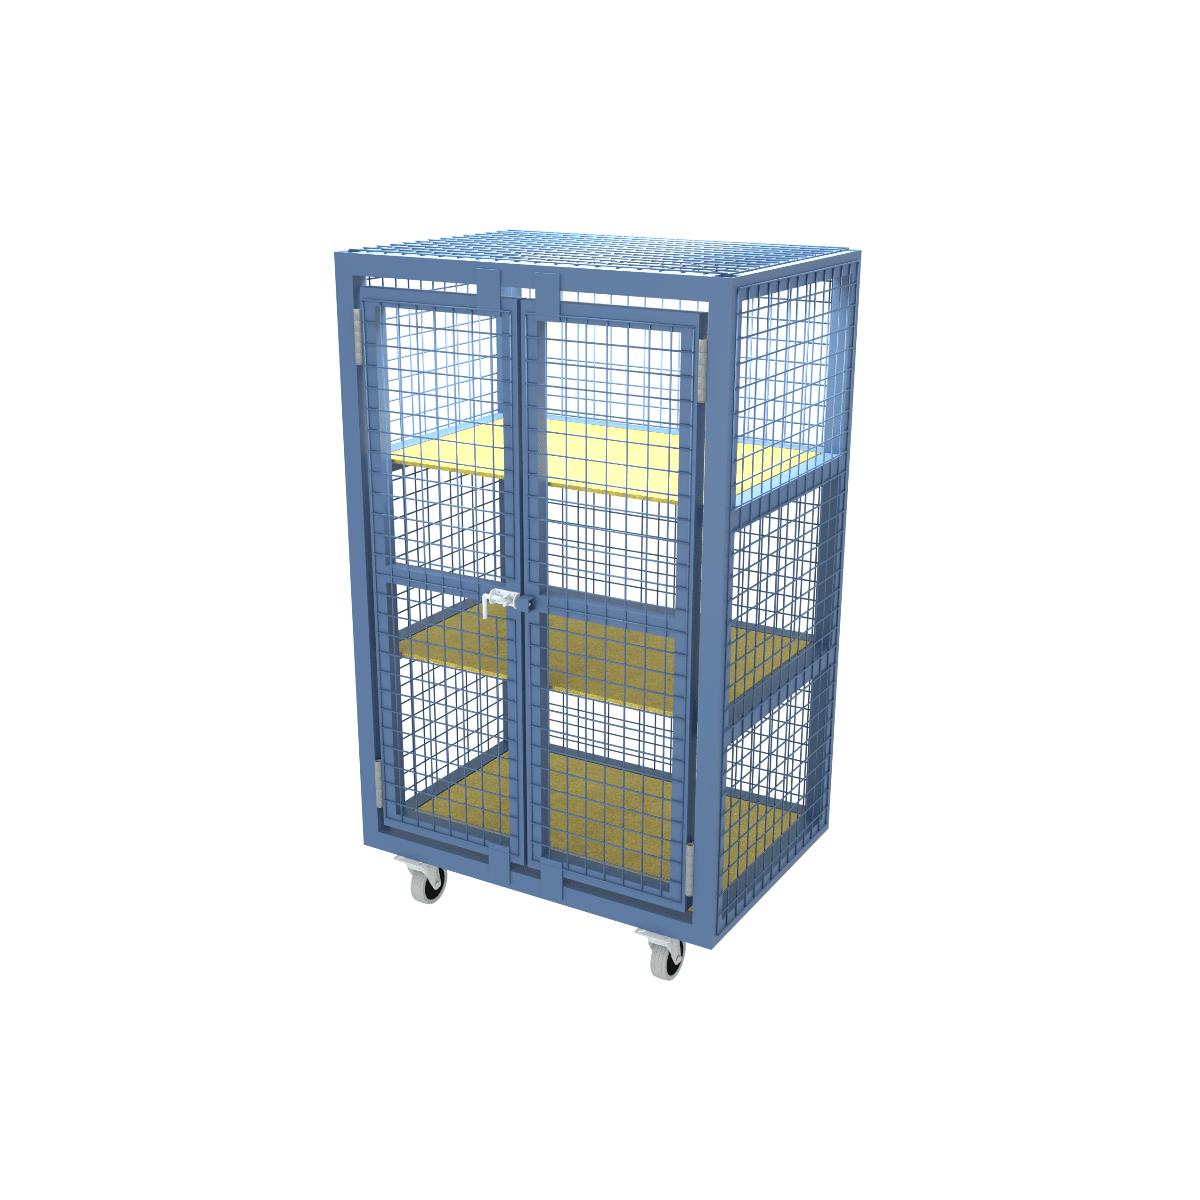 Heavy-duty Mobile Double Door Parcel Cage for easy transportation around site 